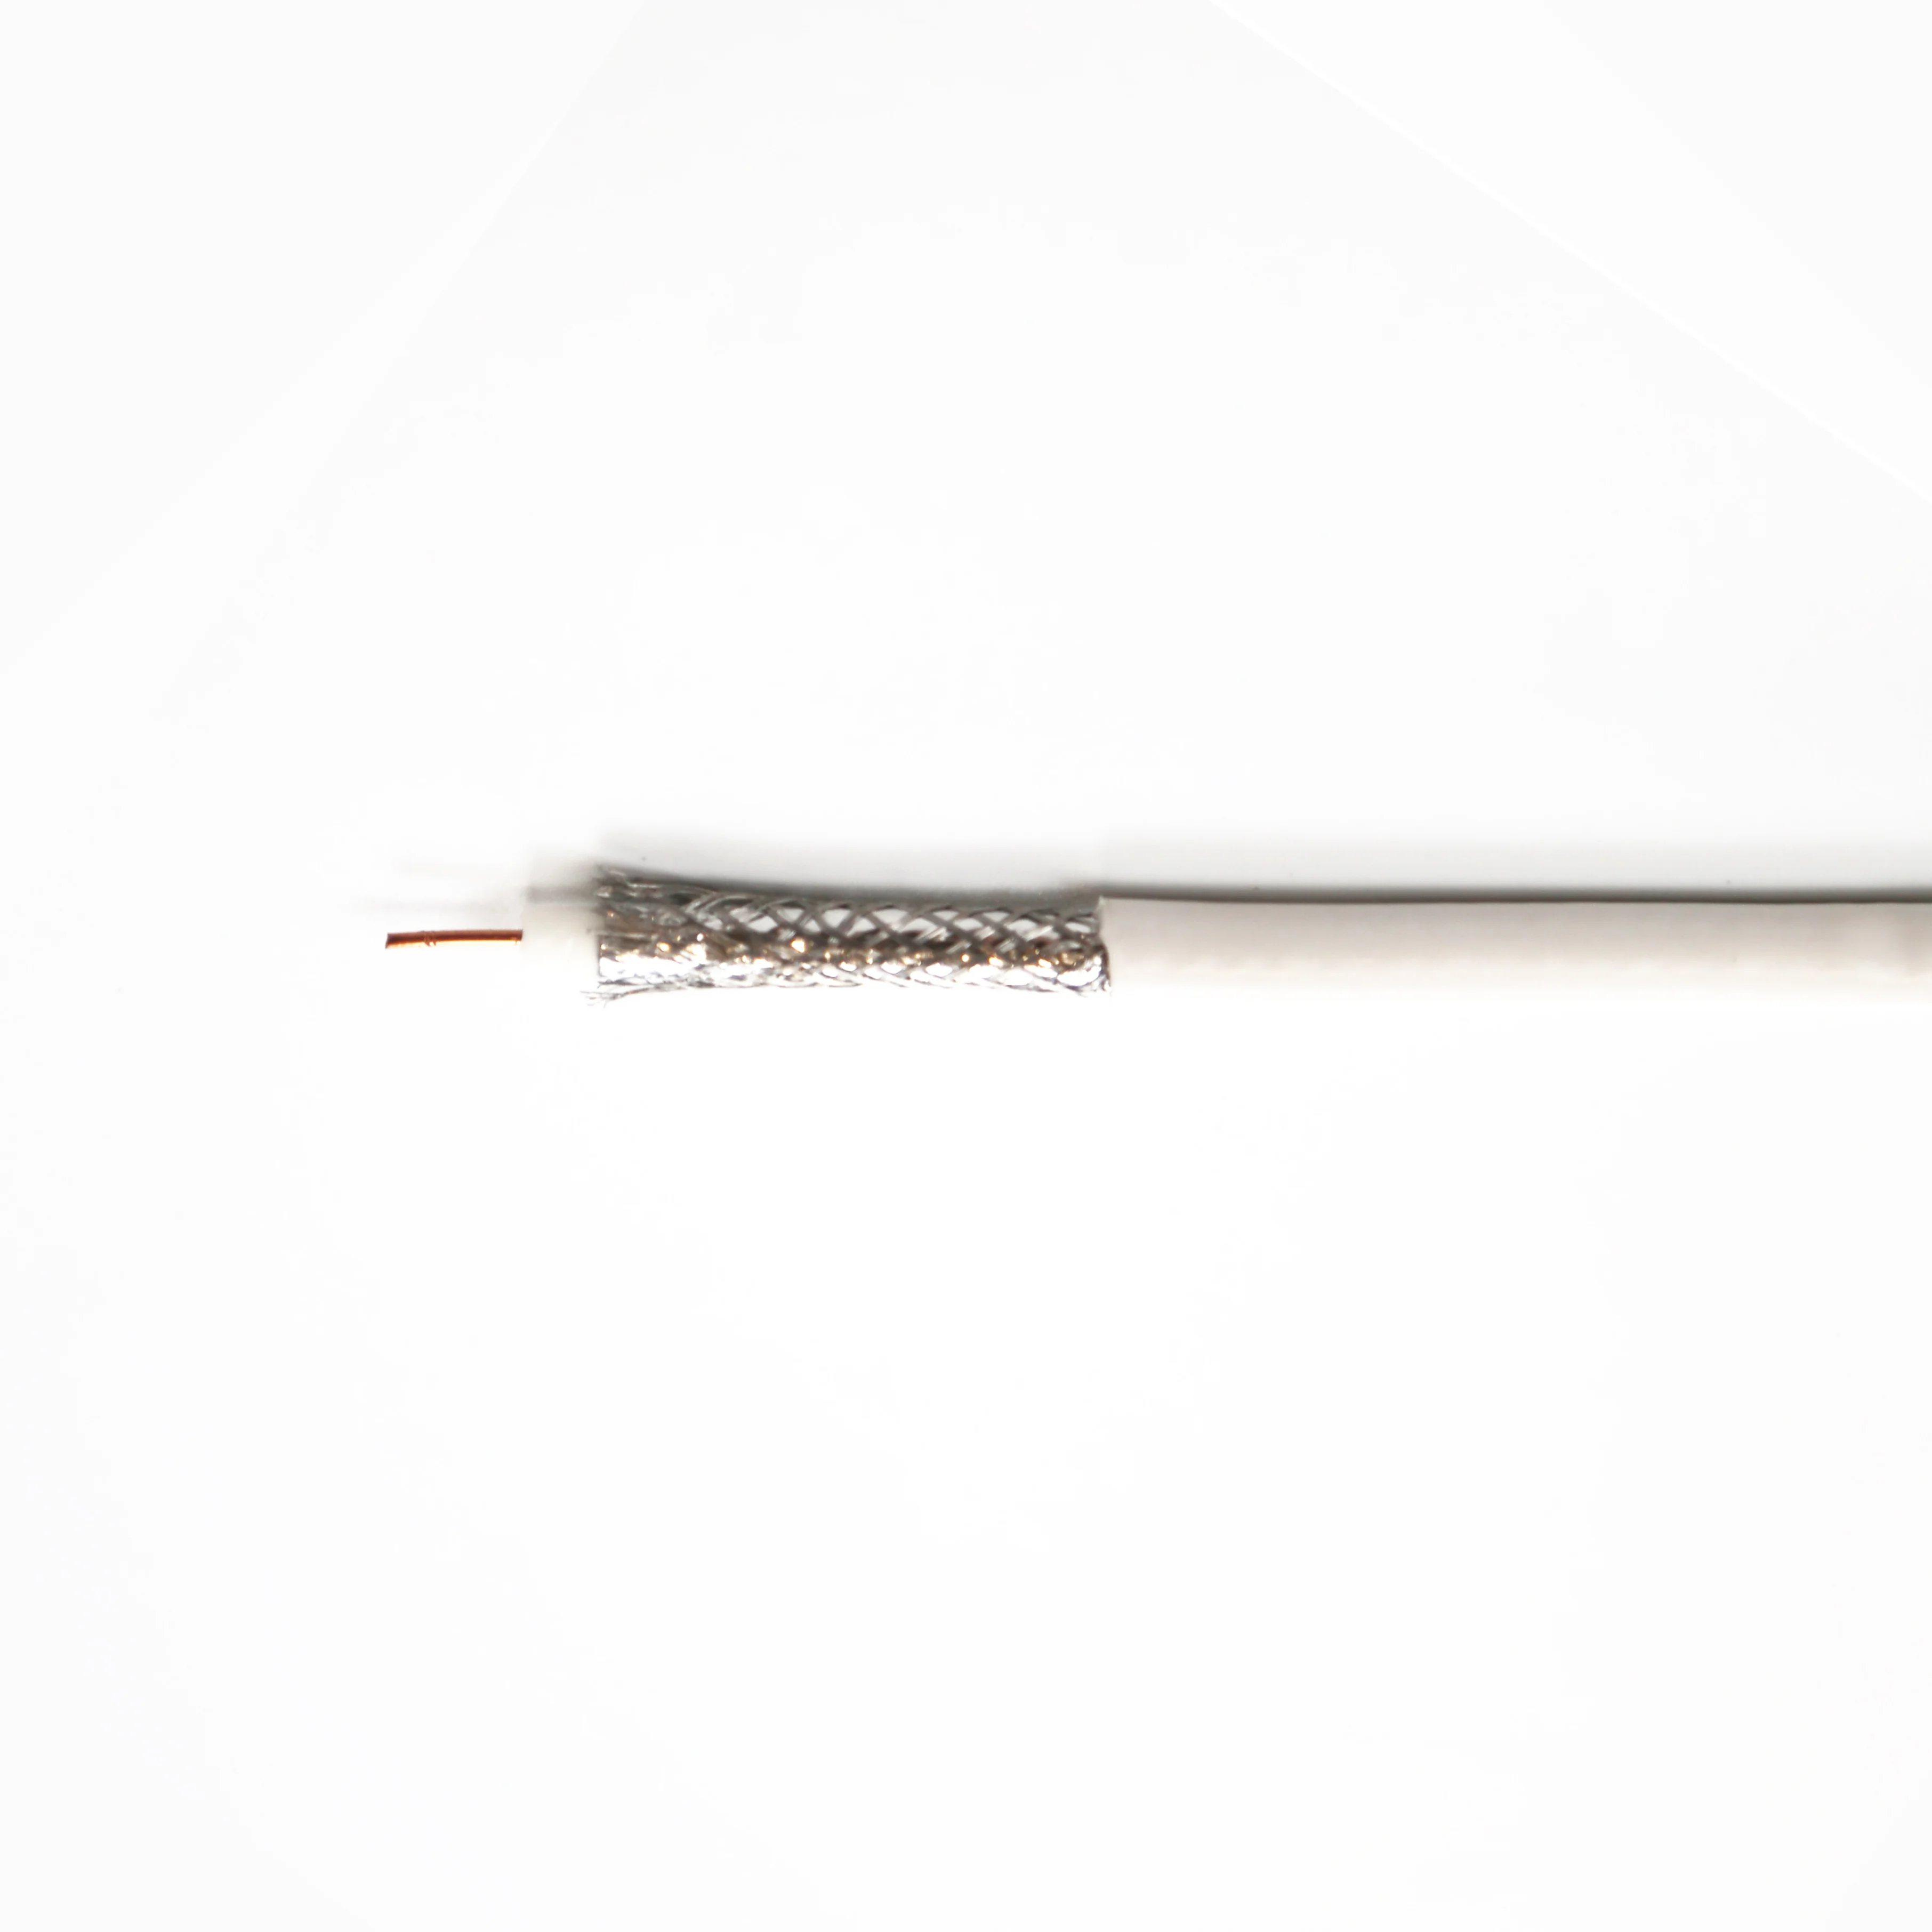 coaxial cable_063.jpg